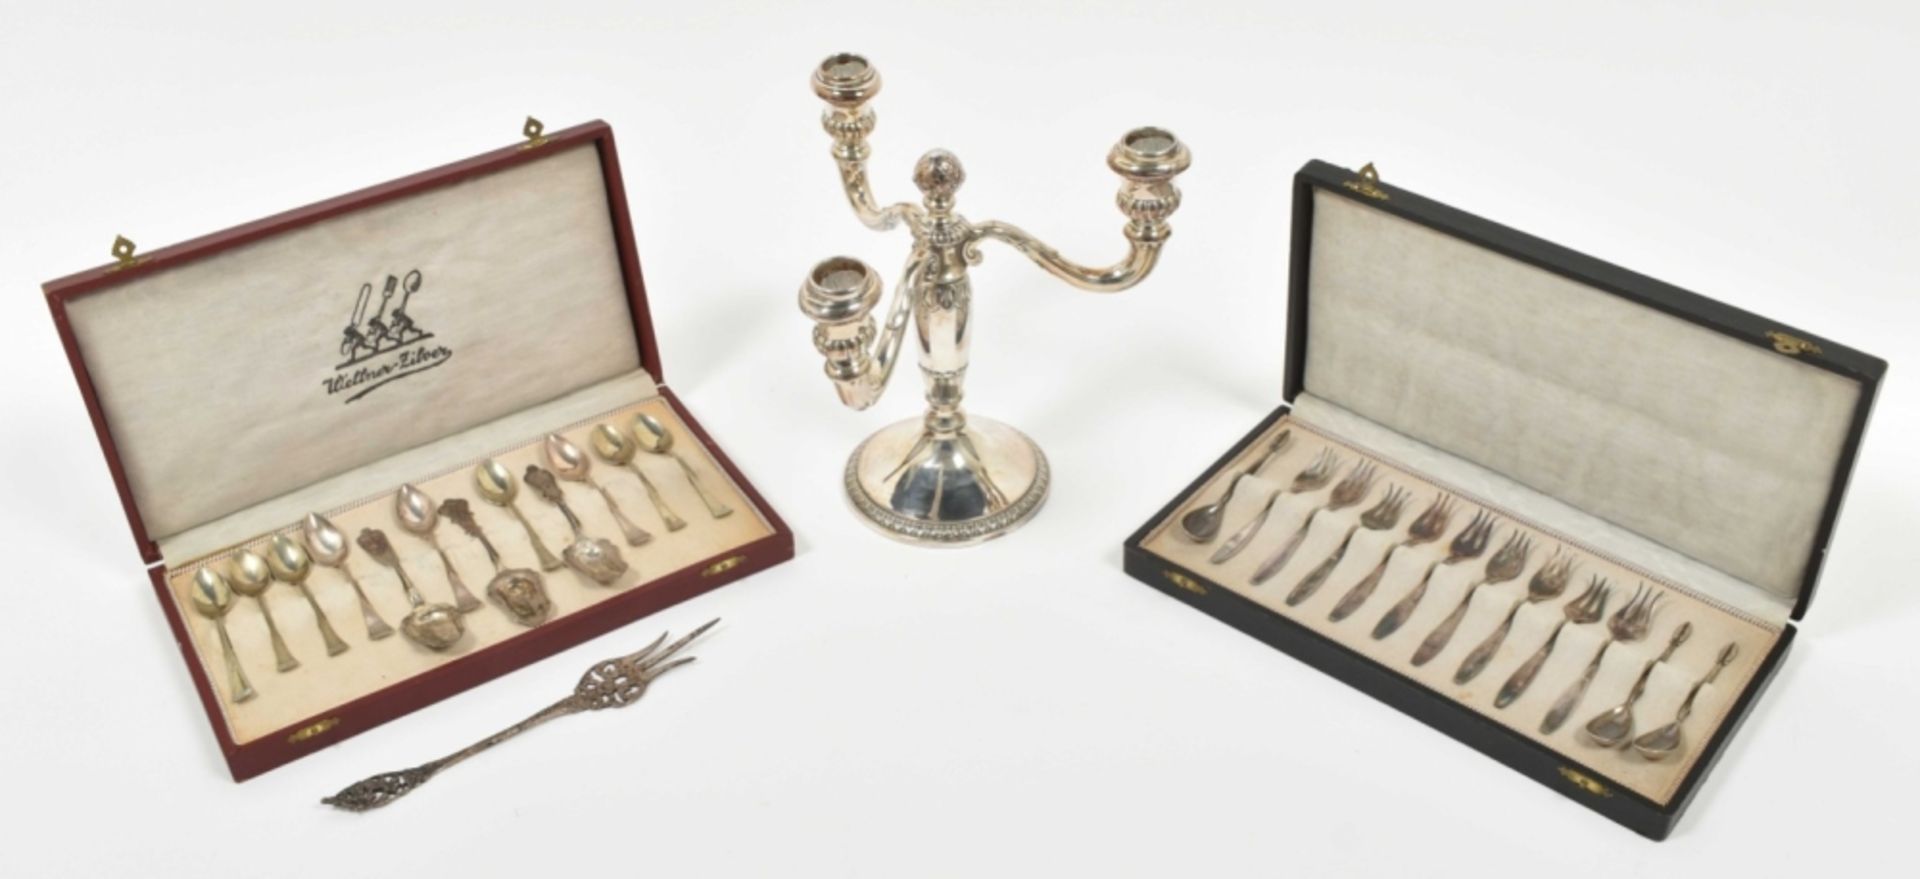 [Silver] Candlestick and silverware